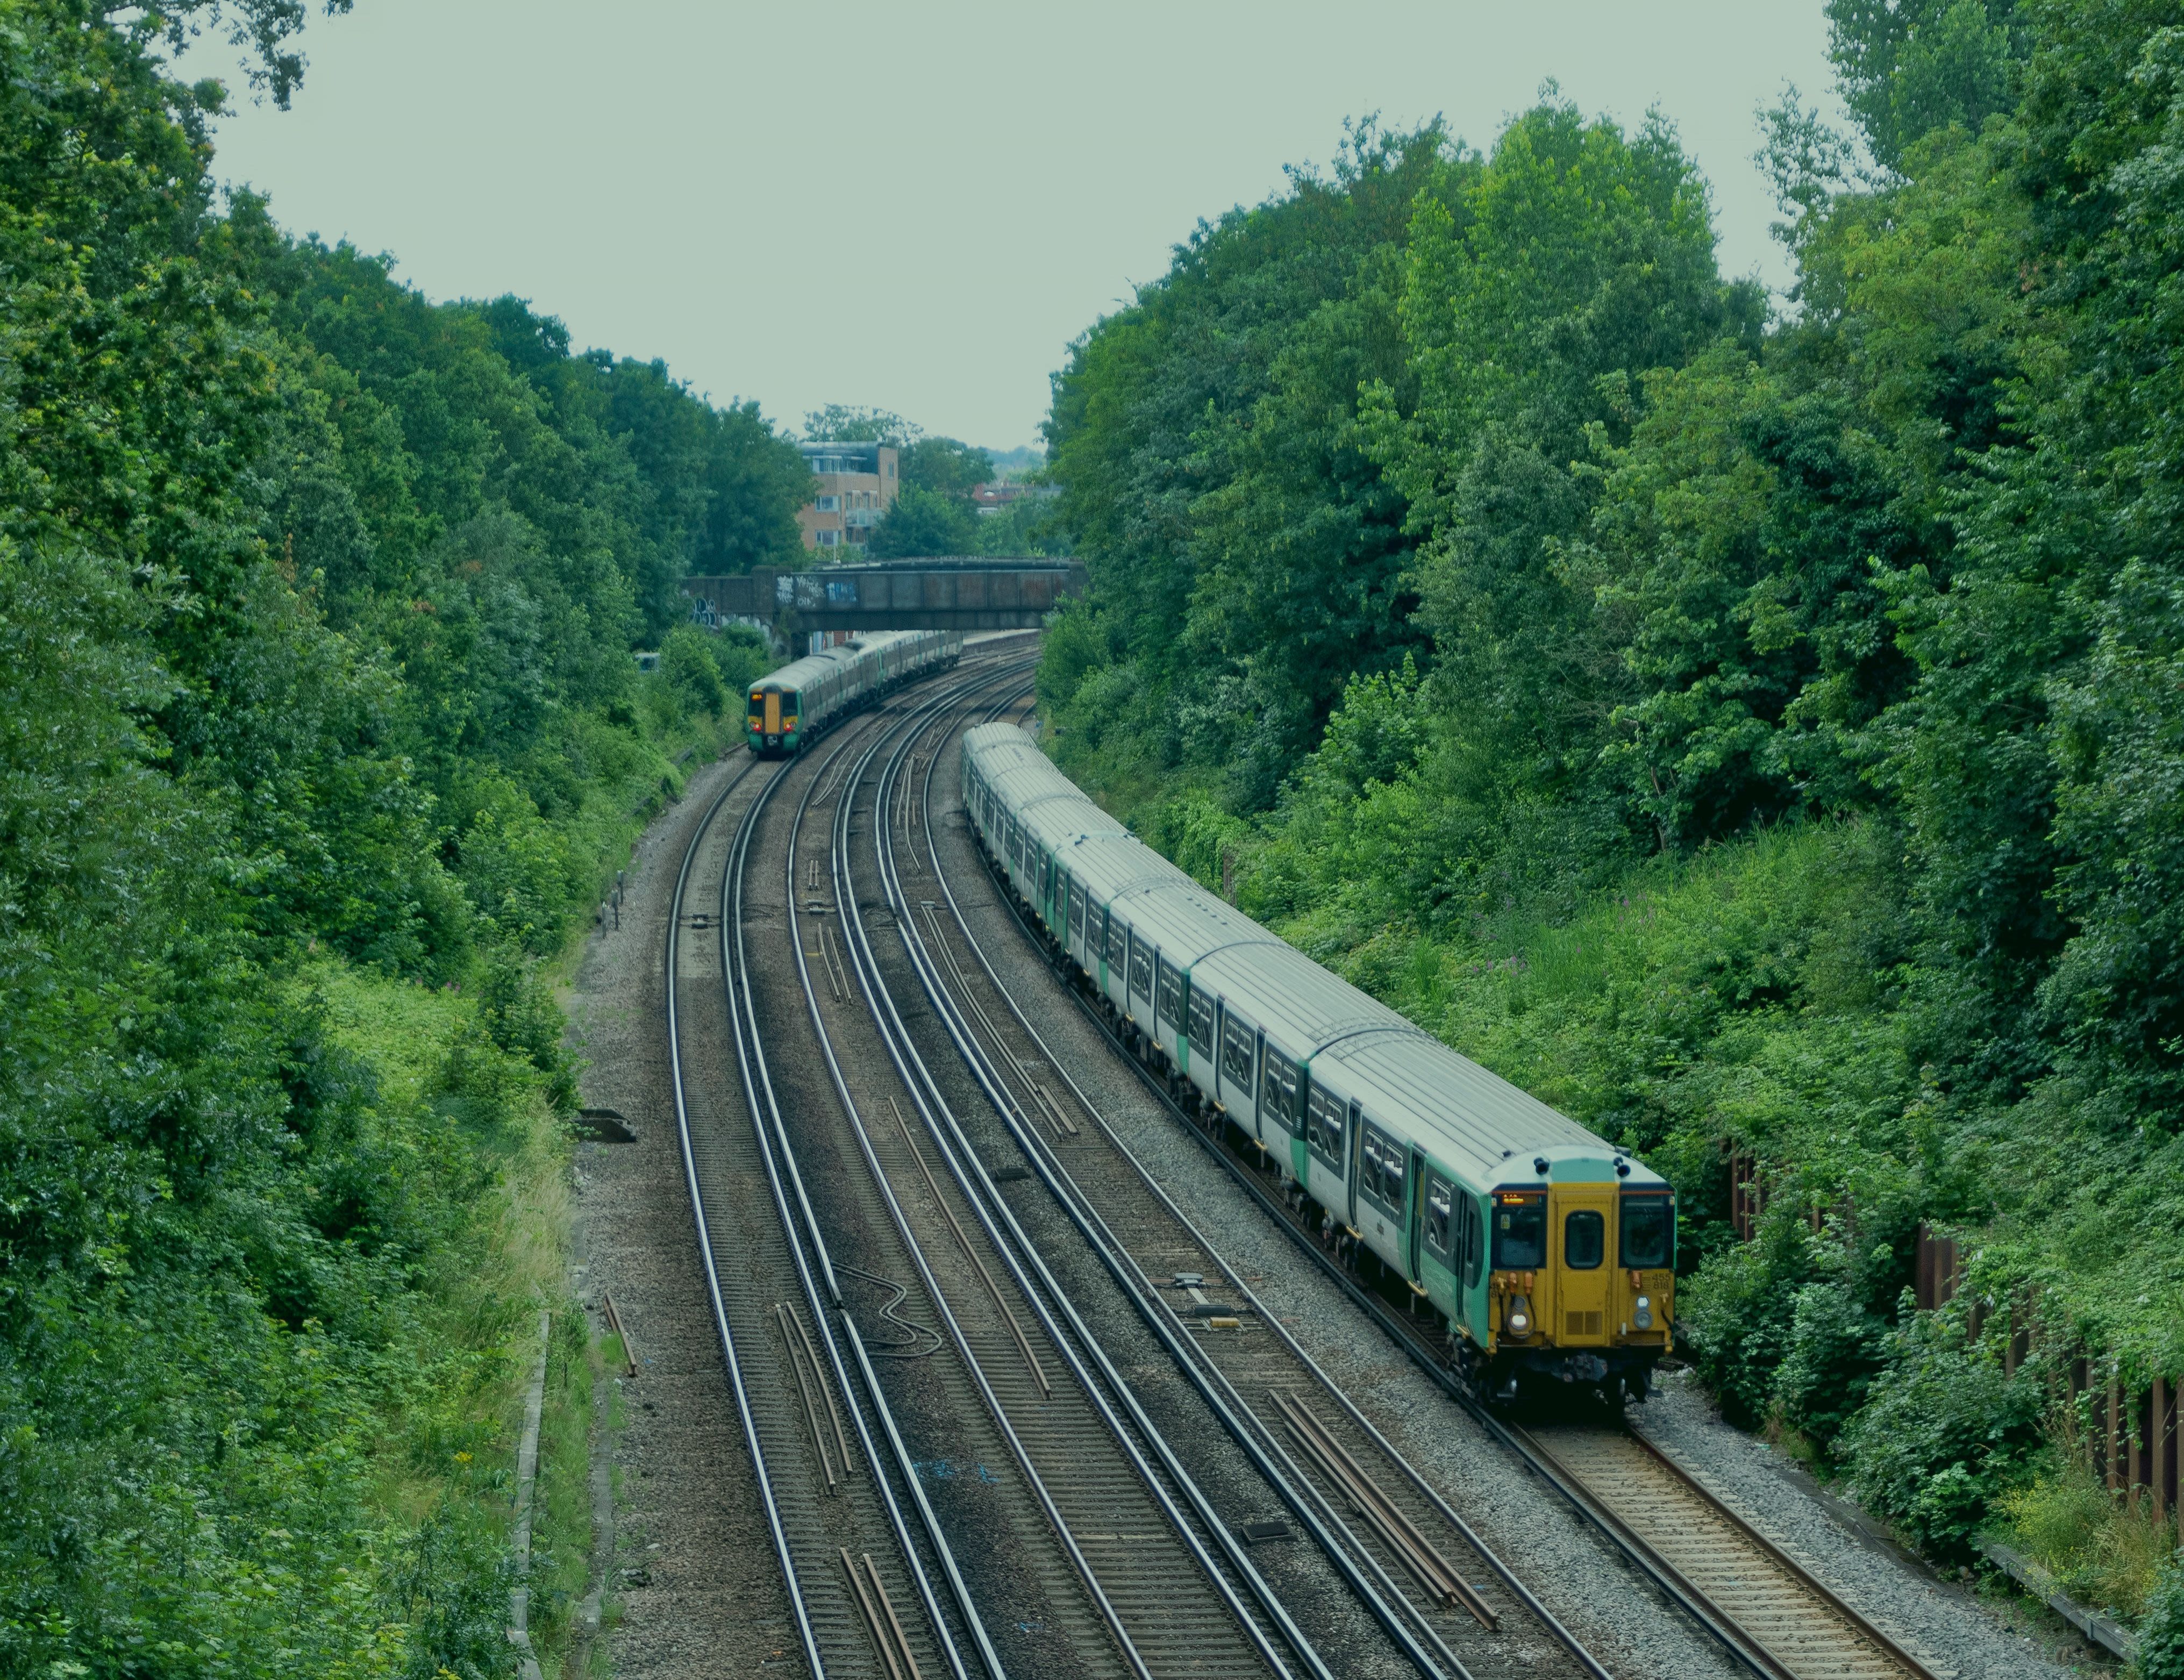 Two trains on rail tracks surrounded by trees